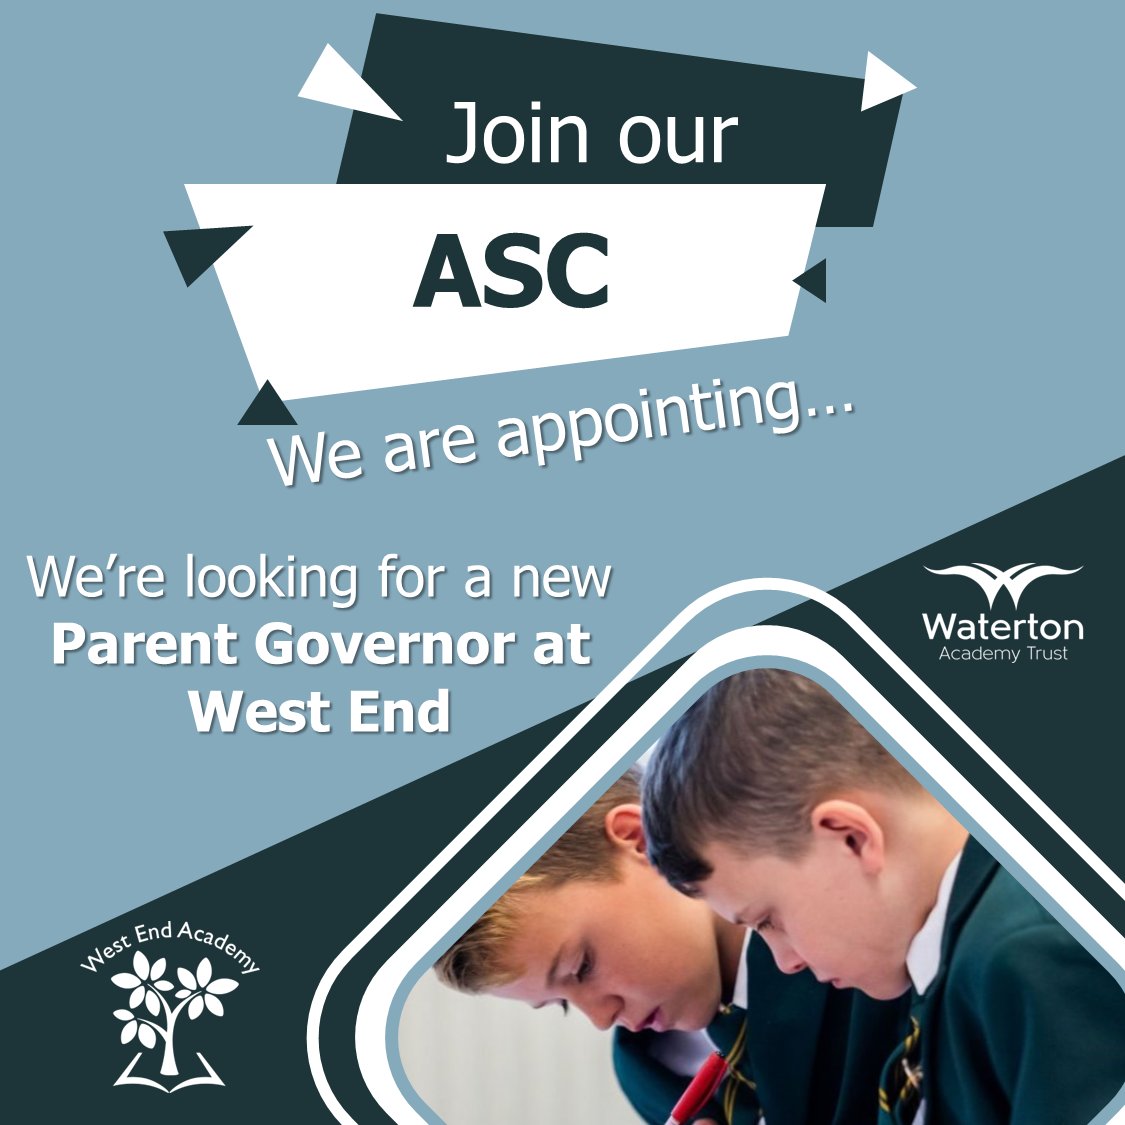 📋 @WestEndWAT is looking to appoint a new Parent Governor to its Academy Standards Committee. 📞Want to find out more? Please visit the school office to arrange a discussion with the headteacher. 🔗Interested in applying? Apply Here: forms.office.com/e/B5TJuQmDvq #SchoolGovernance